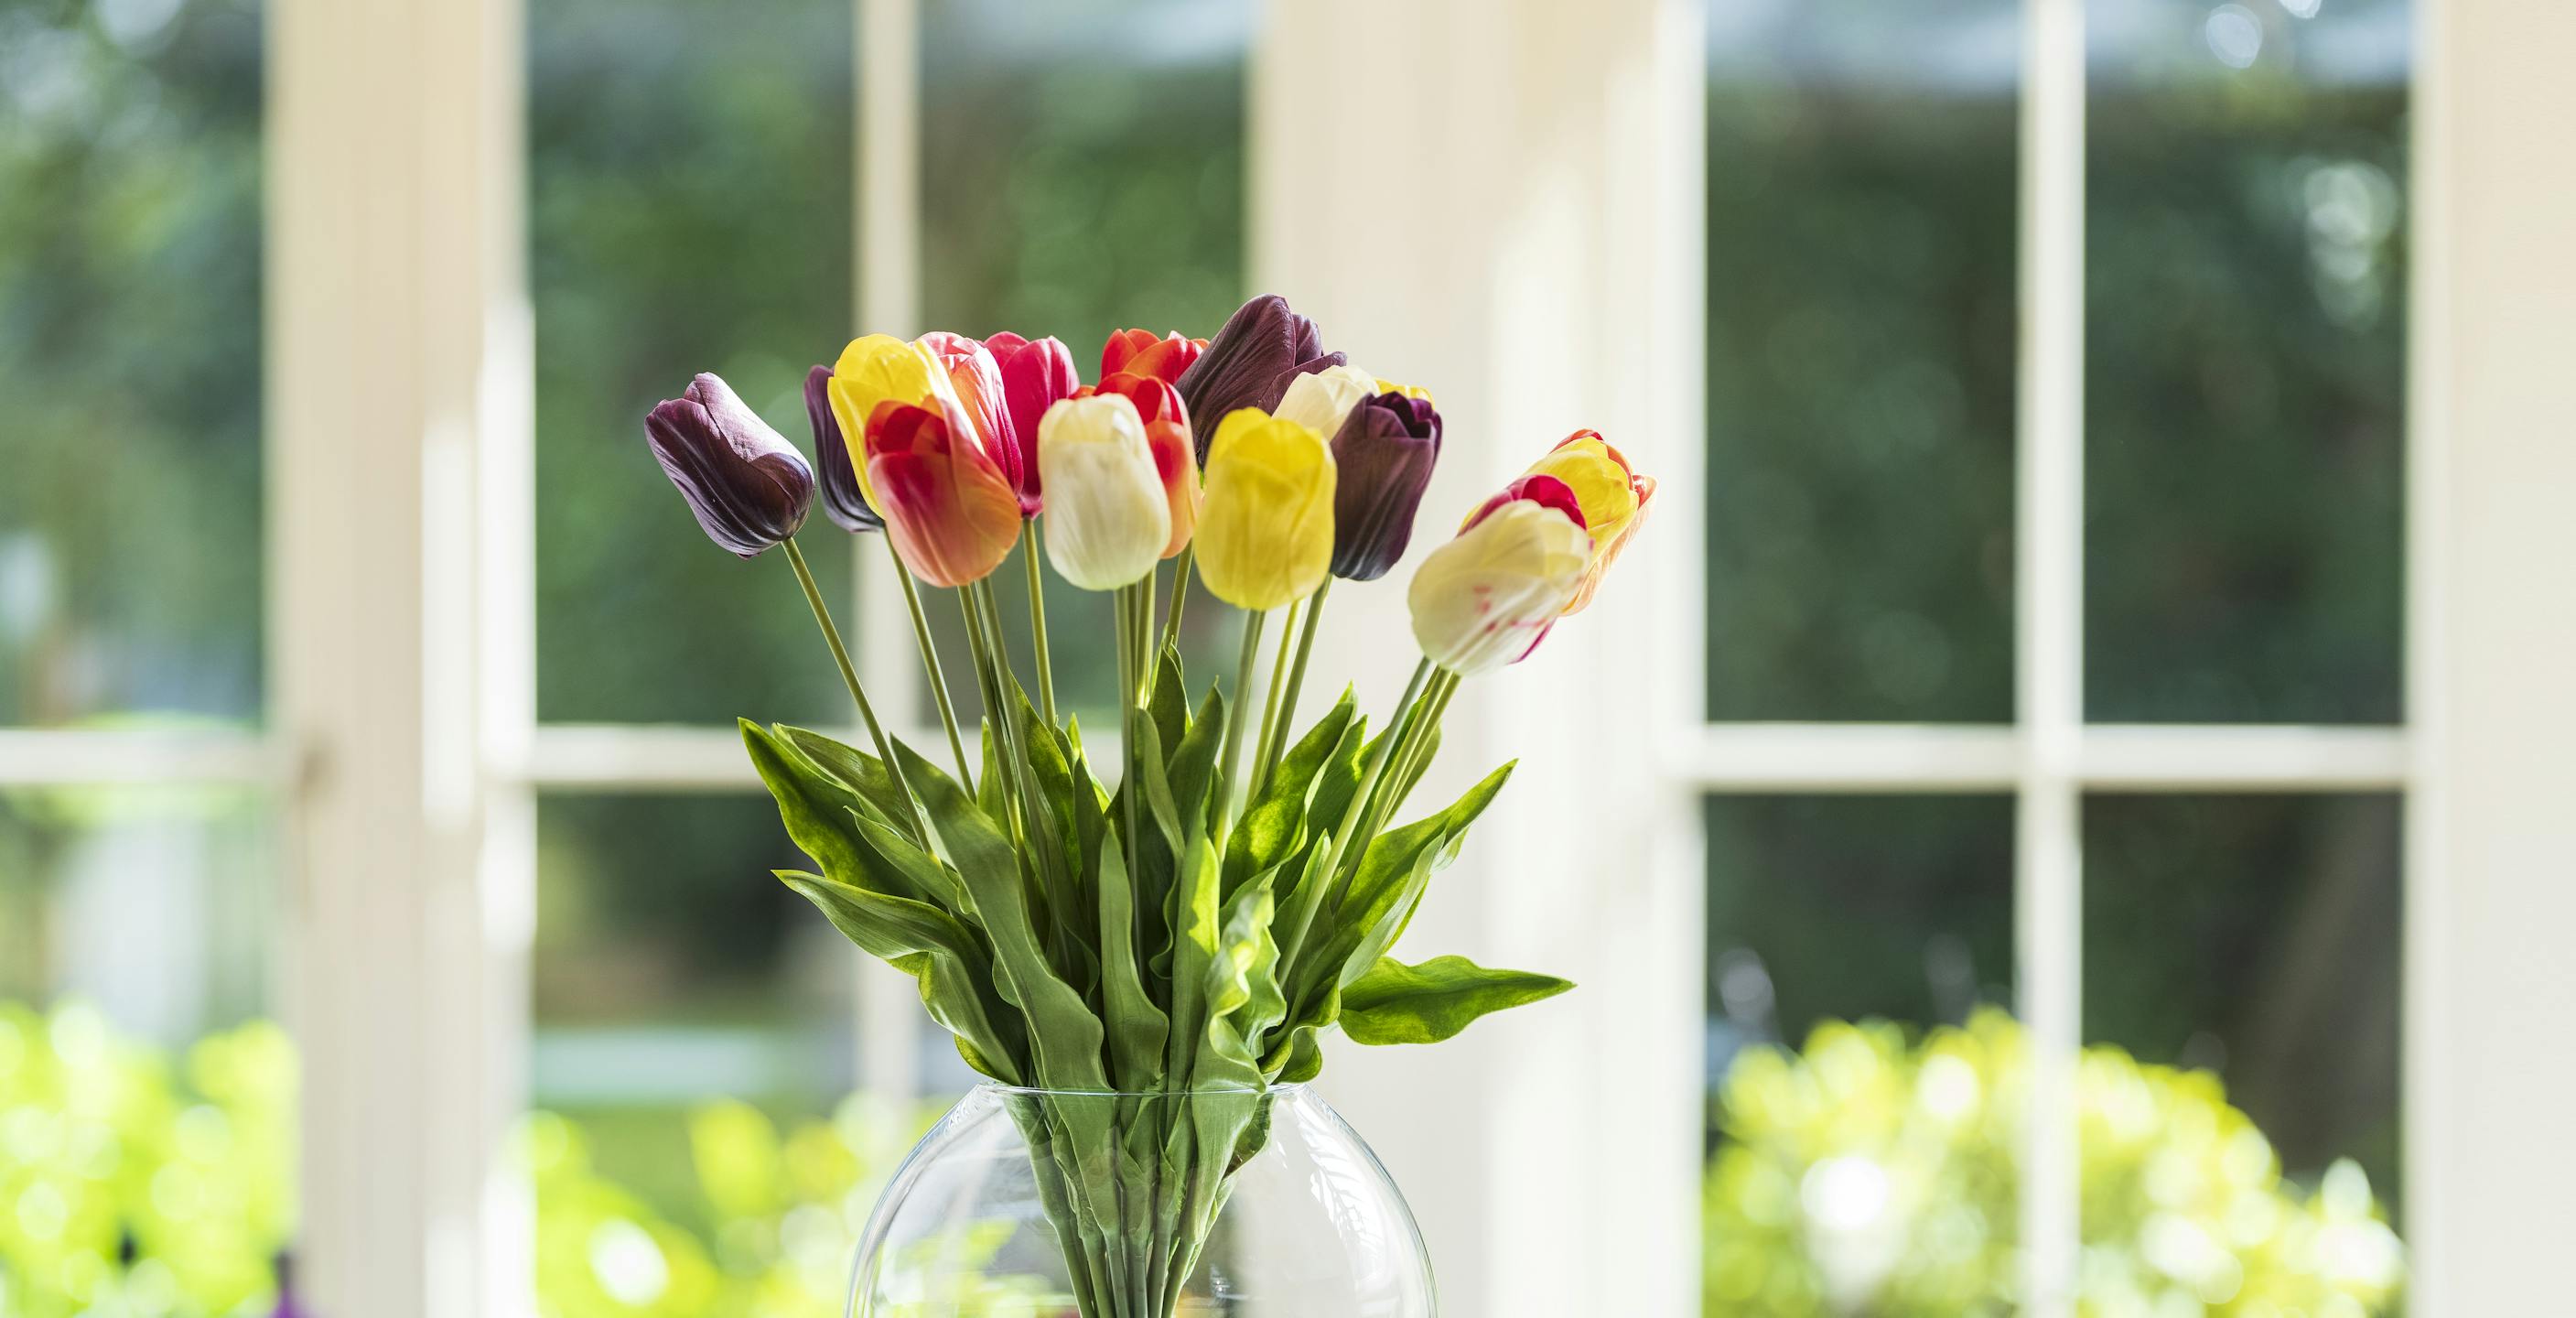 Bunch of artificial tulips on kitchen counter